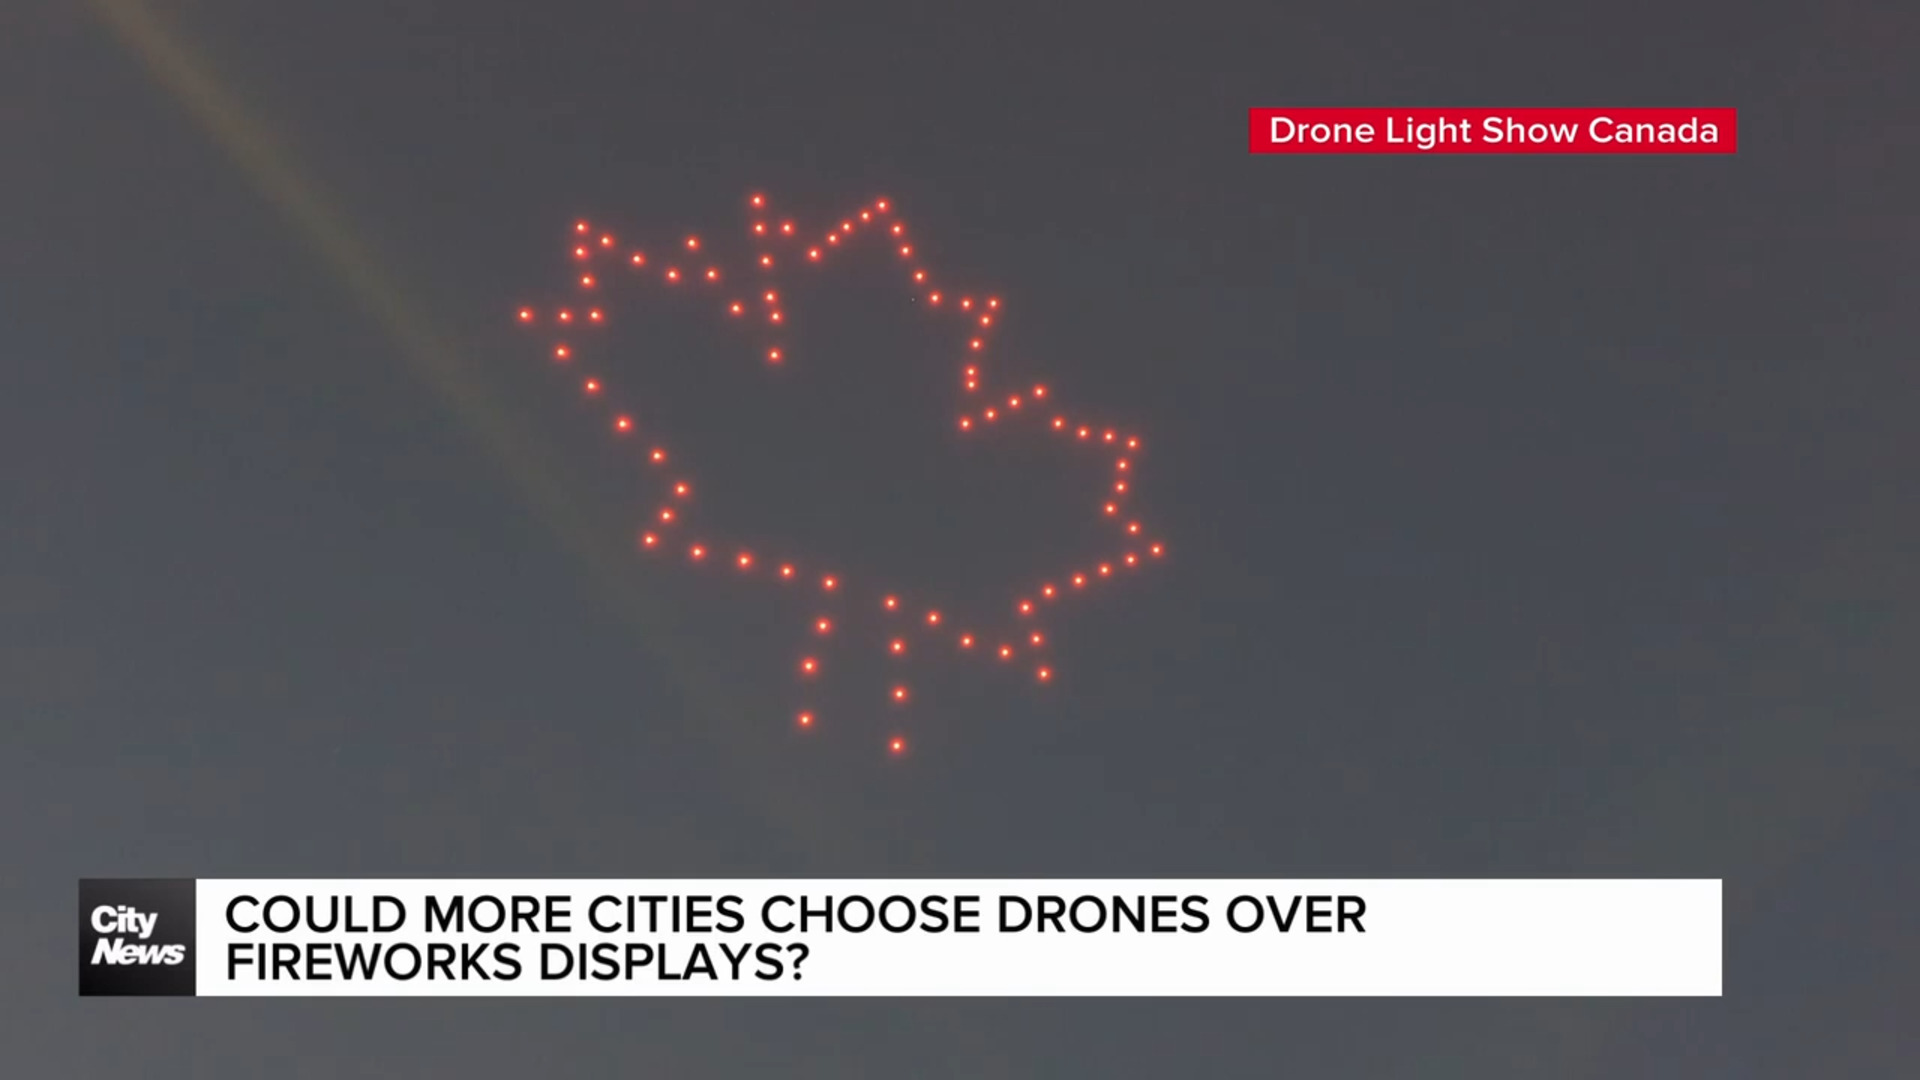 Could more cities choose drones over fireworks?